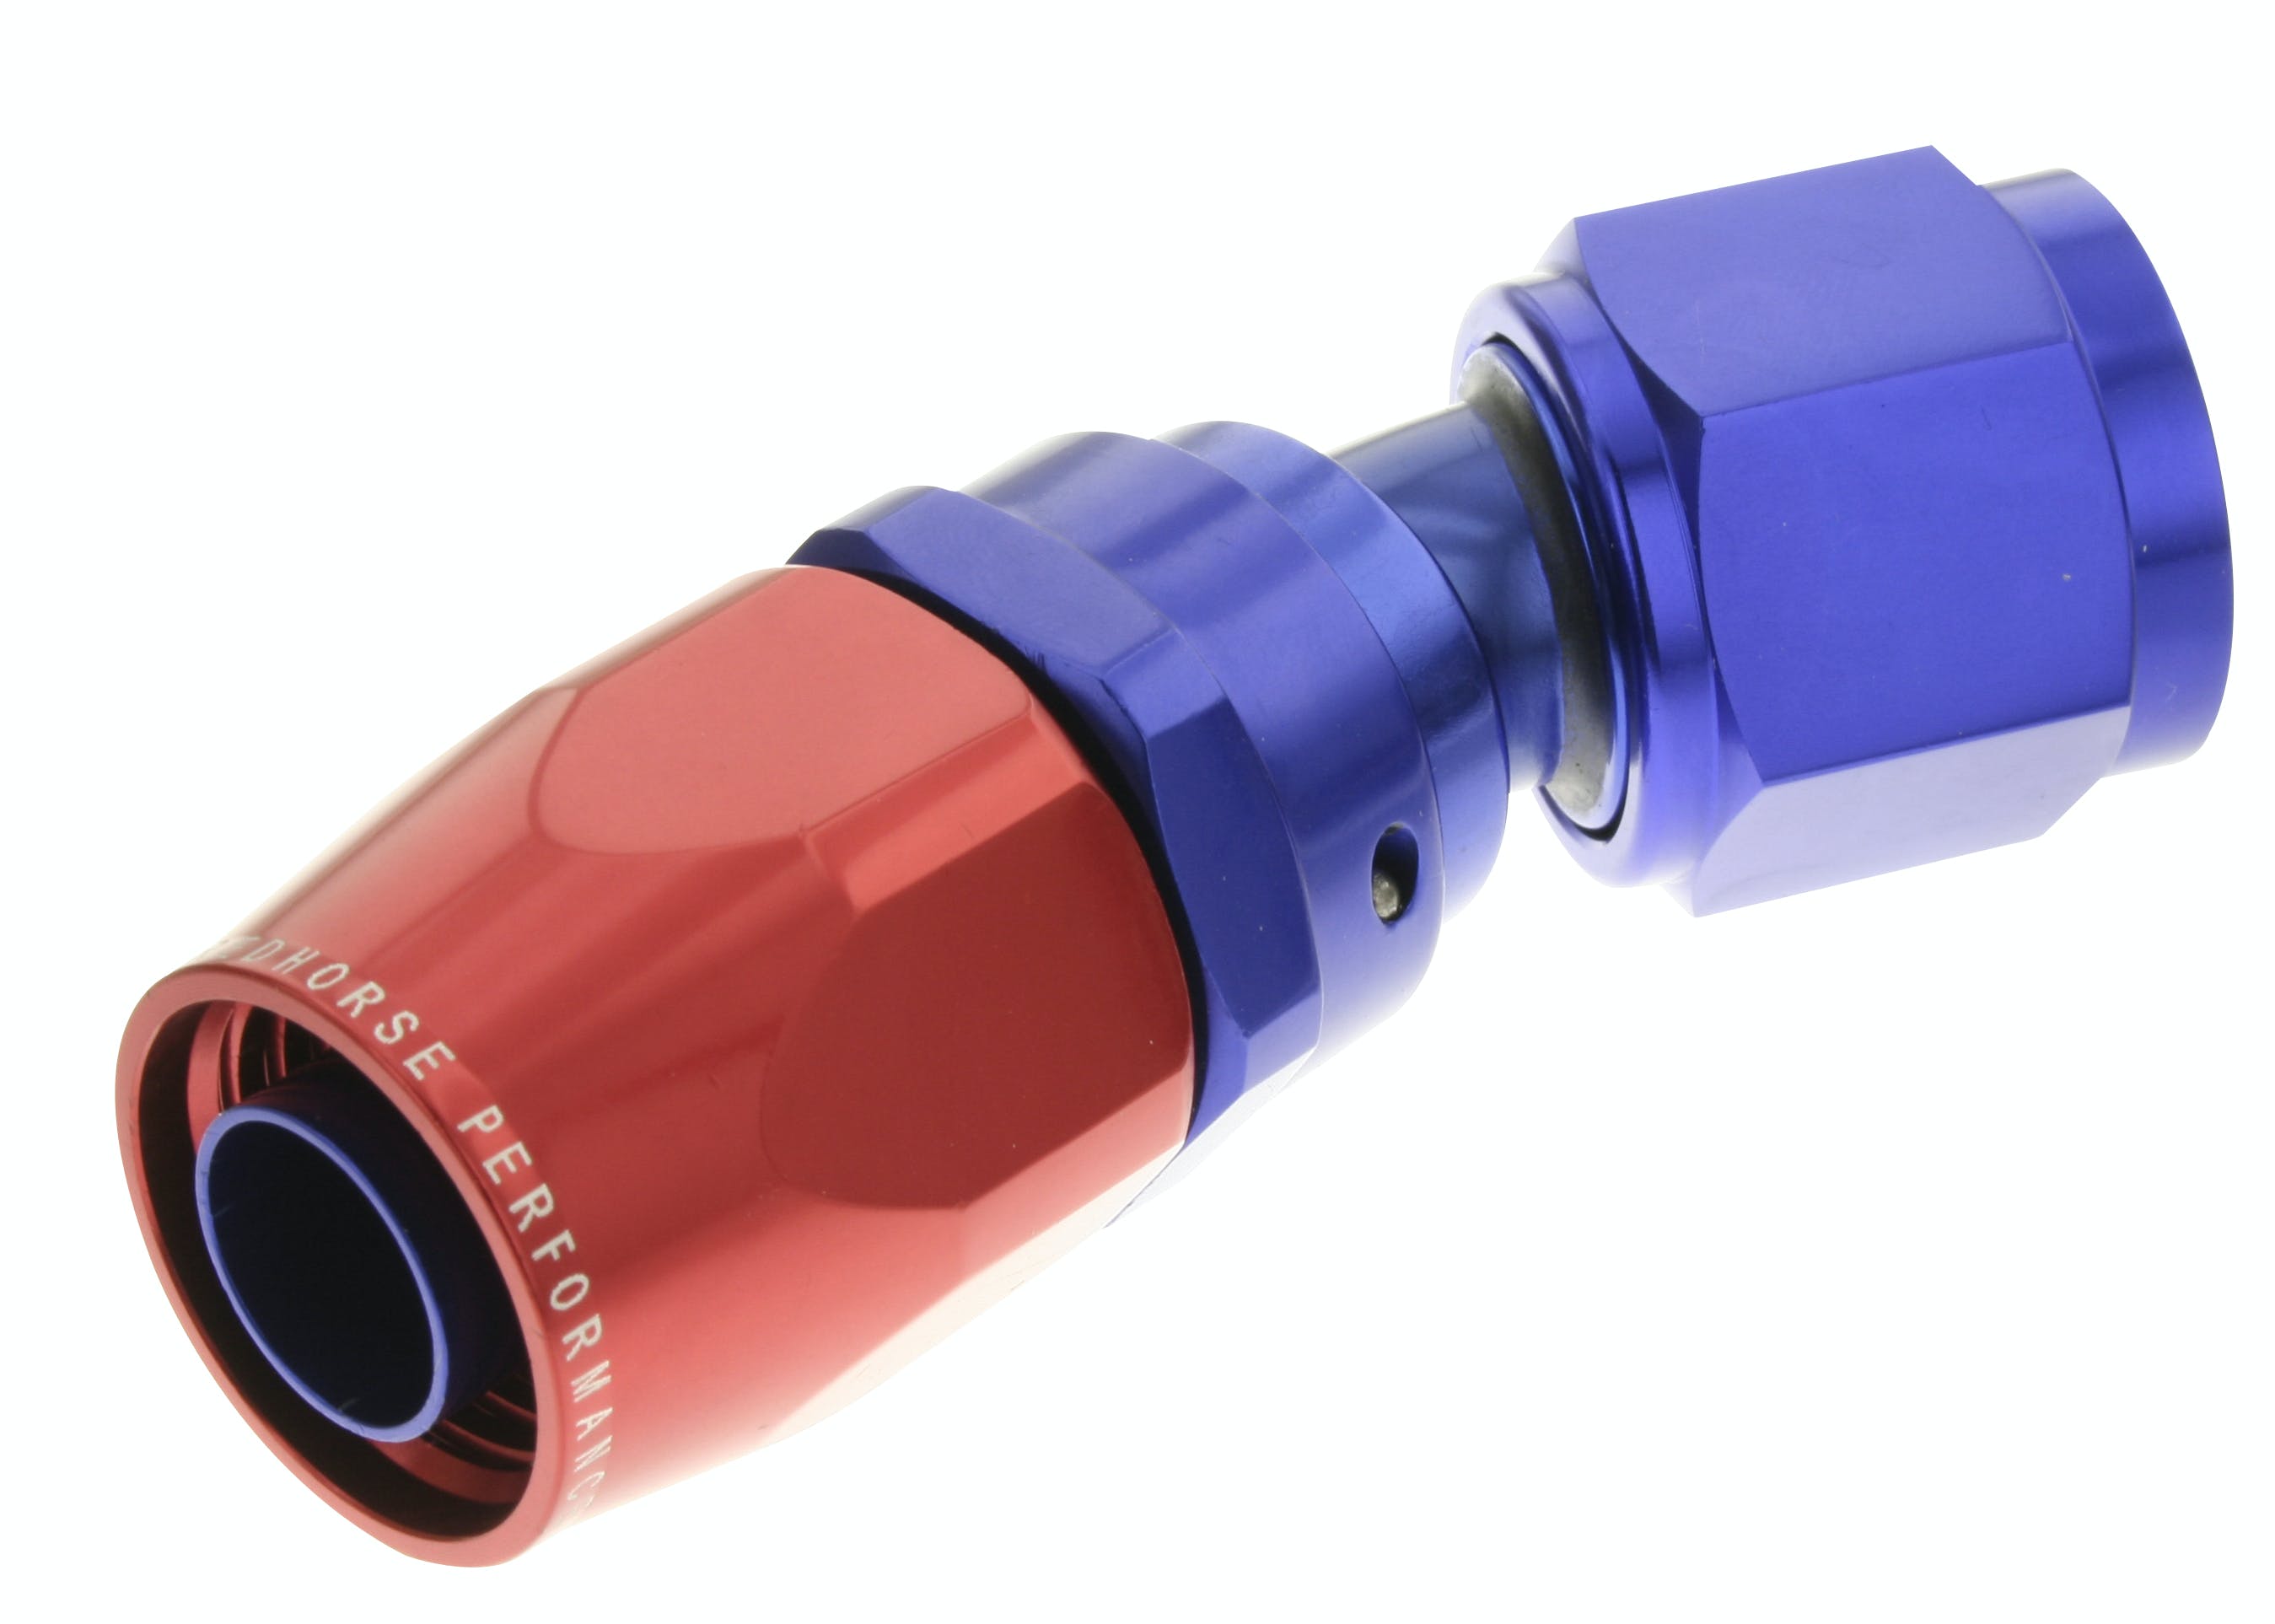 Redhorse Performance 1030-06-1 -06 30 degree Female Aluminum Hose End - red and blue